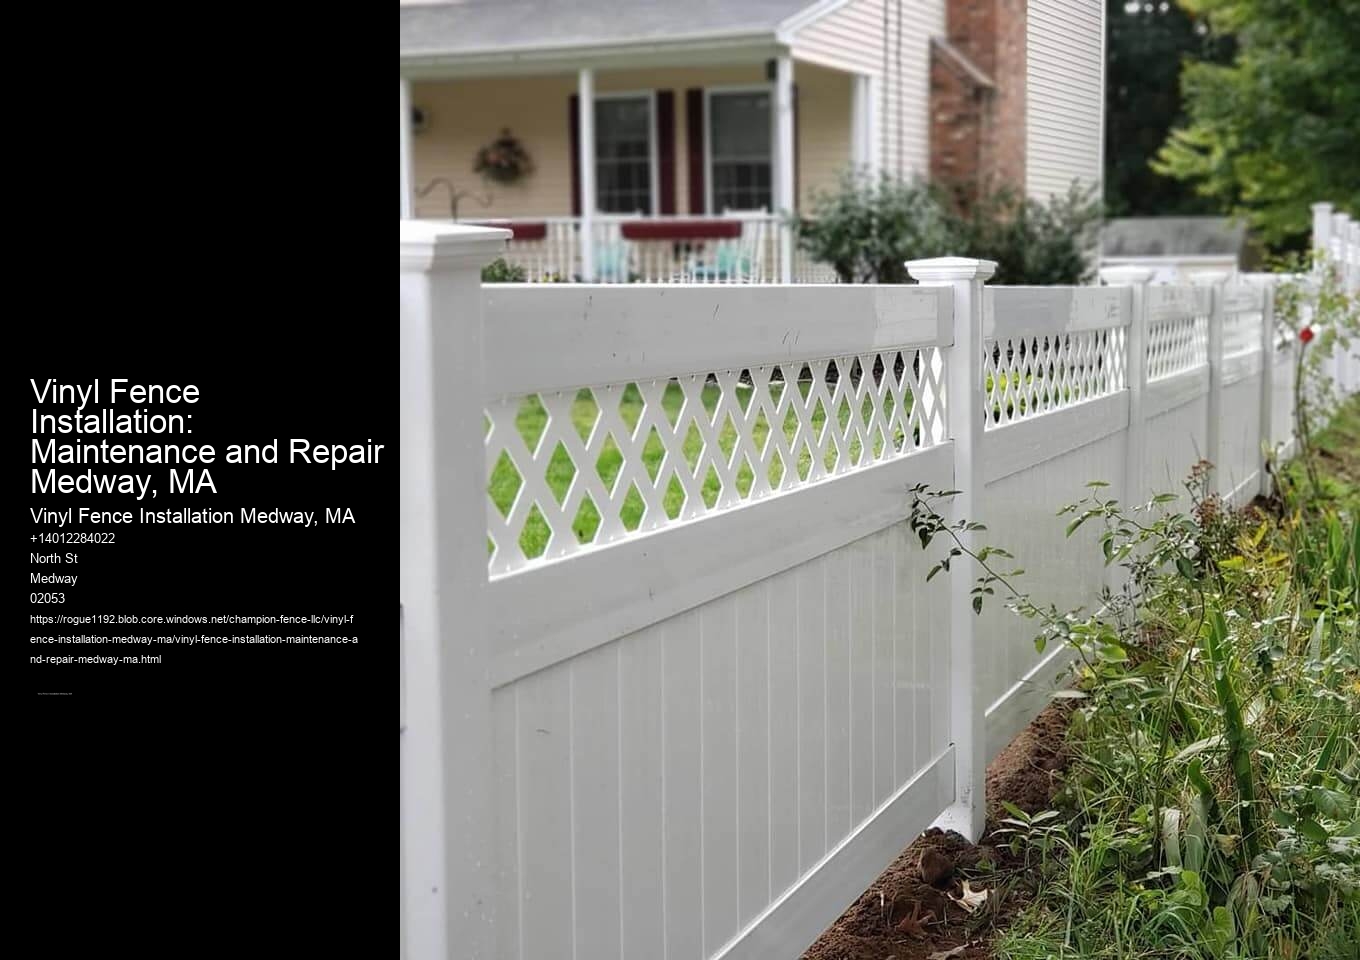 Vinyl Fence Installation: Maintenance and Repair Medway, MA